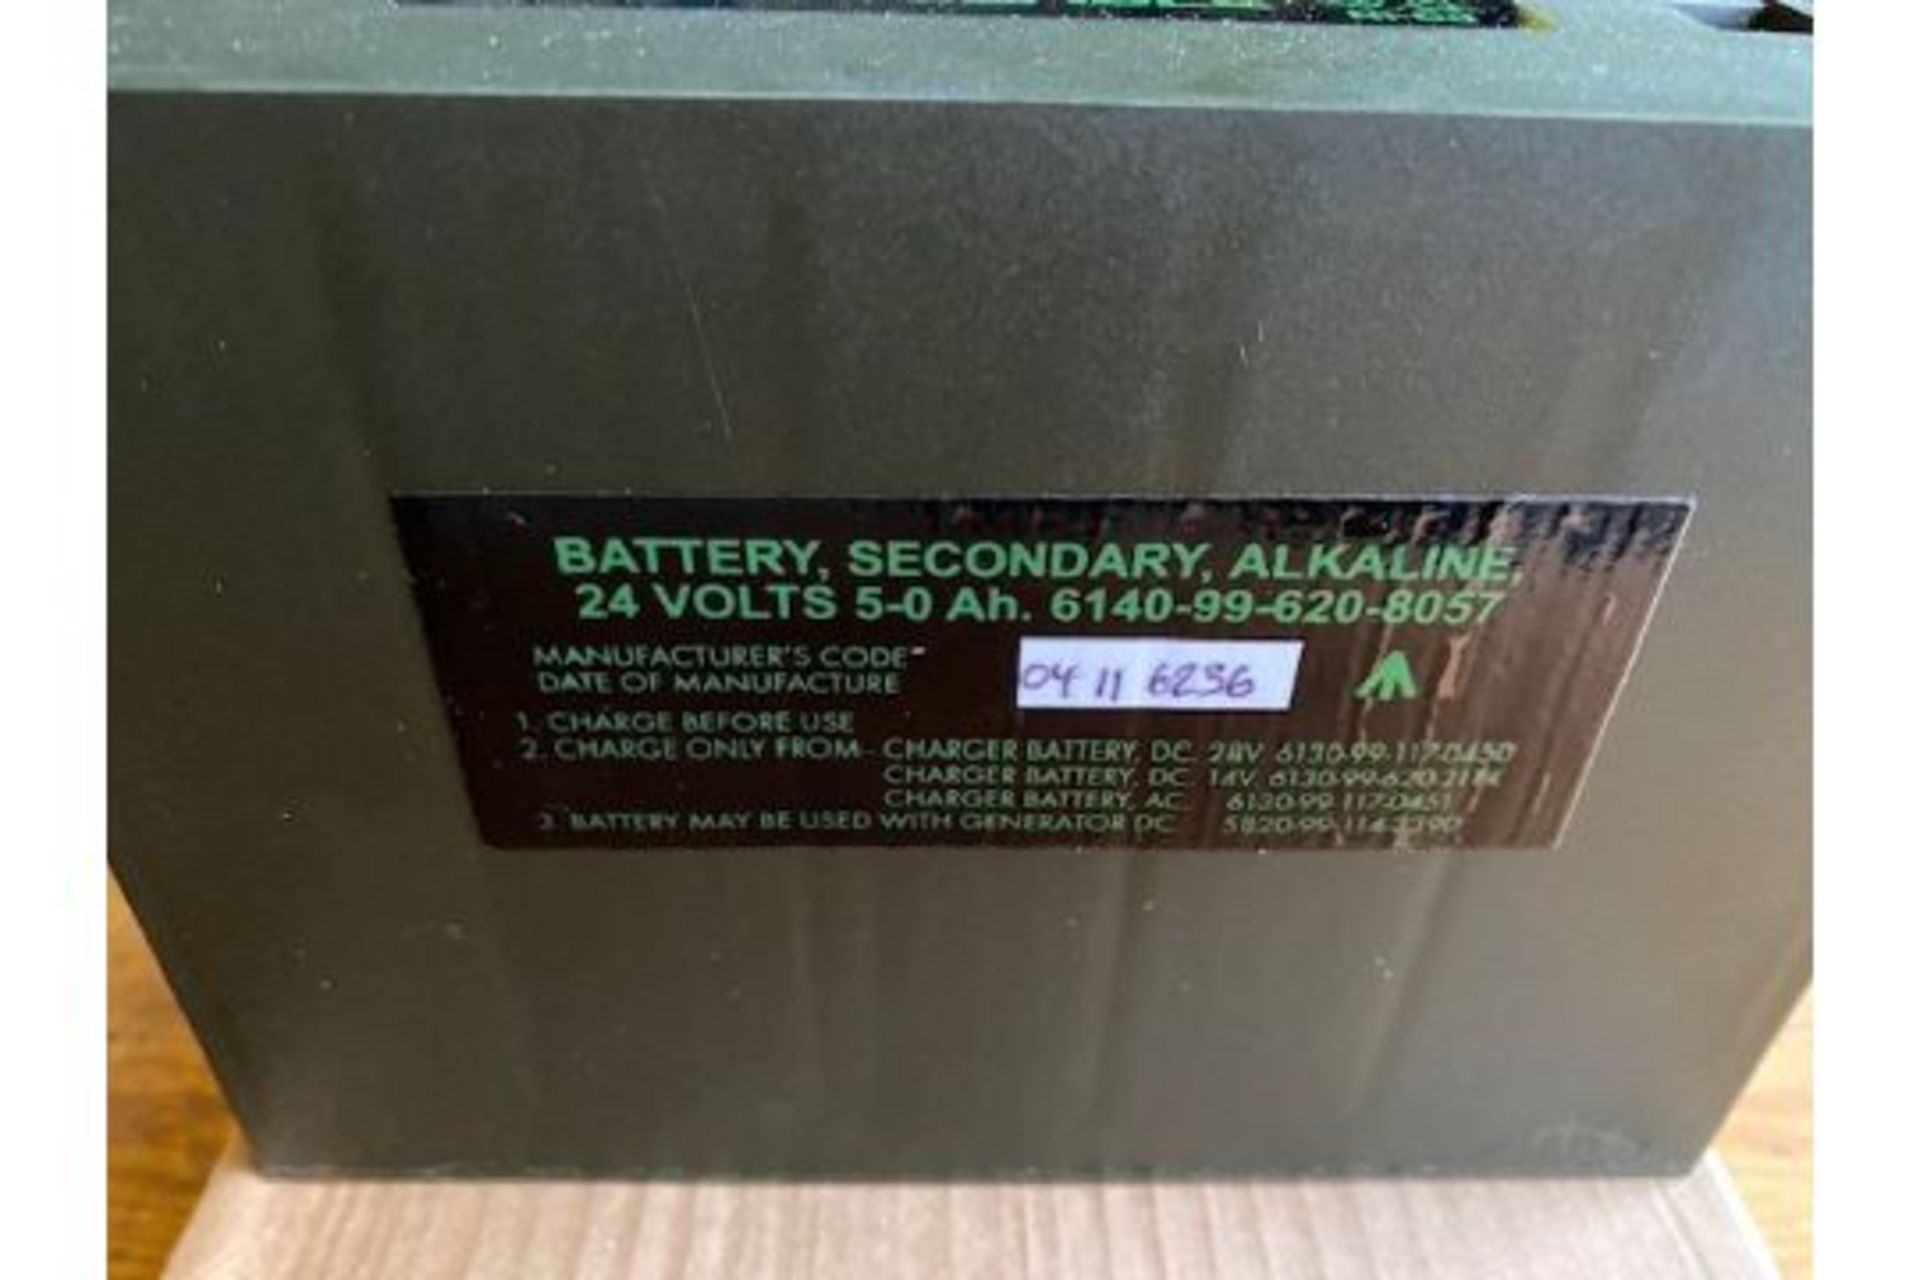 2 x New Unissued Clansman 24 Volt Rechargeable Radio Batteries - Image 5 of 5